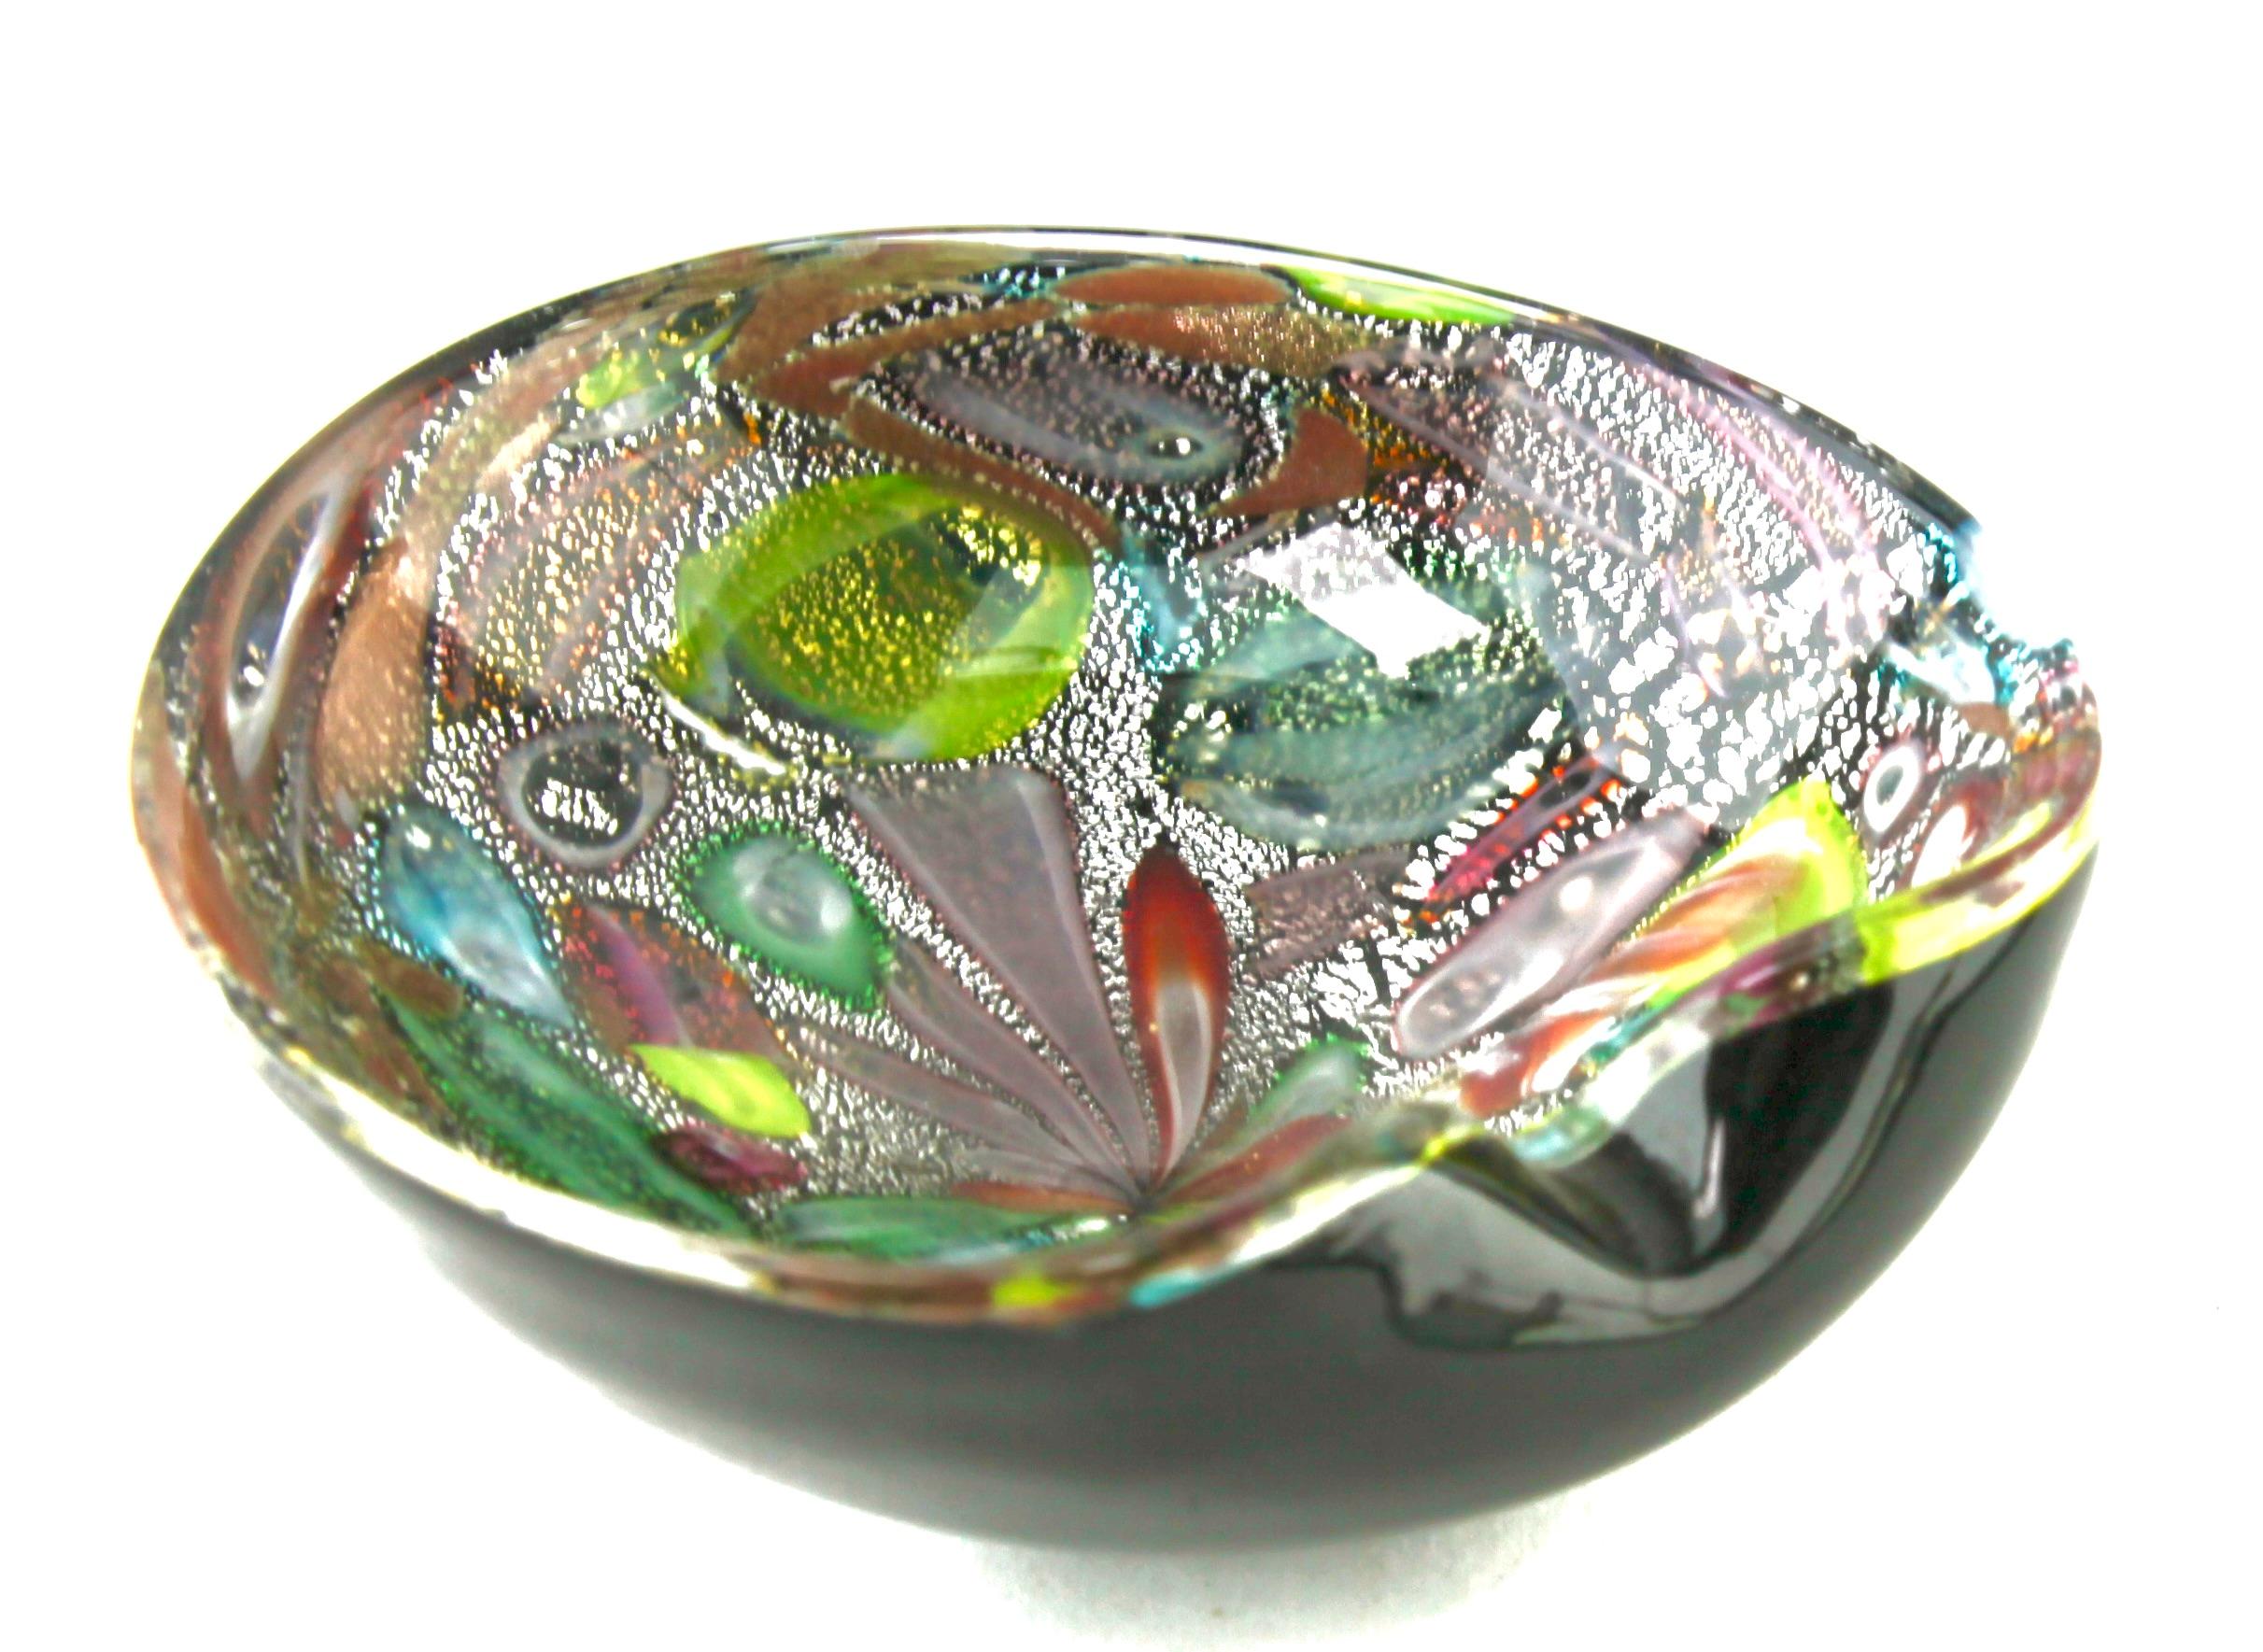 Mid-Century Modern Murano Art Glass Bowl Black Shell, Metals and Bright Colors, Attributed to AVEM